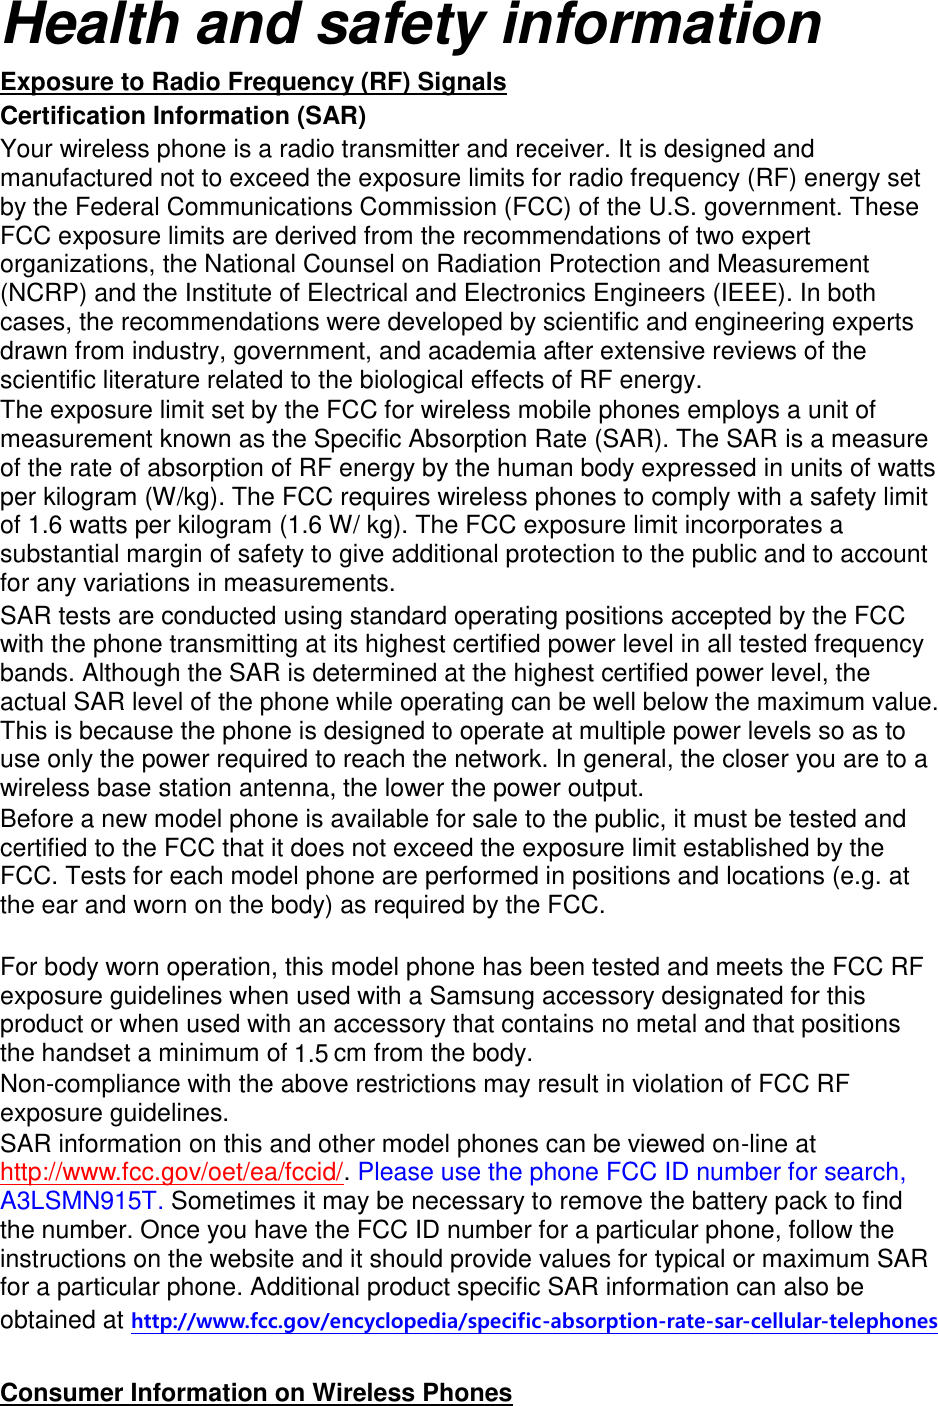 Health and safety information Exposure to Radio Frequency (RF) Signals Certification Information (SAR) Your wireless phone is a radio transmitter and receiver. It is designed and manufactured not to exceed the exposure limits for radio frequency (RF) energy set by the Federal Communications Commission (FCC) of the U.S. government. These FCC exposure limits are derived from the recommendations of two expert organizations, the National Counsel on Radiation Protection and Measurement (NCRP) and the Institute of Electrical and Electronics Engineers (IEEE). In both cases, the recommendations were developed by scientific and engineering experts drawn from industry, government, and academia after extensive reviews of the scientific literature related to the biological effects of RF energy. The exposure limit set by the FCC for wireless mobile phones employs a unit of measurement known as the Specific Absorption Rate (SAR). The SAR is a measure of the rate of absorption of RF energy by the human body expressed in units of watts per kilogram (W/kg). The FCC requires wireless phones to comply with a safety limit of 1.6 watts per kilogram (1.6 W/ kg). The FCC exposure limit incorporates a substantial margin of safety to give additional protection to the public and to account for any variations in measurements. SAR tests are conducted using standard operating positions accepted by the FCC with the phone transmitting at its highest certified power level in all tested frequency bands. Although the SAR is determined at the highest certified power level, the actual SAR level of the phone while operating can be well below the maximum value. This is because the phone is designed to operate at multiple power levels so as to use only the power required to reach the network. In general, the closer you are to a wireless base station antenna, the lower the power output. Before a new model phone is available for sale to the public, it must be tested and certified to the FCC that it does not exceed the exposure limit established by the FCC. Tests for each model phone are performed in positions and locations (e.g. at the ear and worn on the body) as required by the FCC.      For body worn operation, this model phone has been tested and meets the FCC RF exposure guidelines when used with a Samsung accessory designated for this product or when used with an accessory that contains no metal and that positions the handset a minimum of 󱠯  cm from the body.   Non-compliance with the above restrictions may result in violation of FCC RF exposure guidelines. SAR information on this and other model phones can be viewed on-line at http://www.fcc.gov/oet/ea/fccid/. Please use the phone FCC ID number for search, A3LSMN915T. Sometimes it may be necessary to remove the battery pack to find the number. Once you have the FCC ID number for a particular phone, follow the instructions on the website and it should provide values for typical or maximum SAR for a particular phone. Additional product specific SAR information can also be obtained at http://www.fcc.gov/encyclopedia/specific-absorption-rate-sar-cellular-telephones  Consumer Information on Wireless Phones 1.5